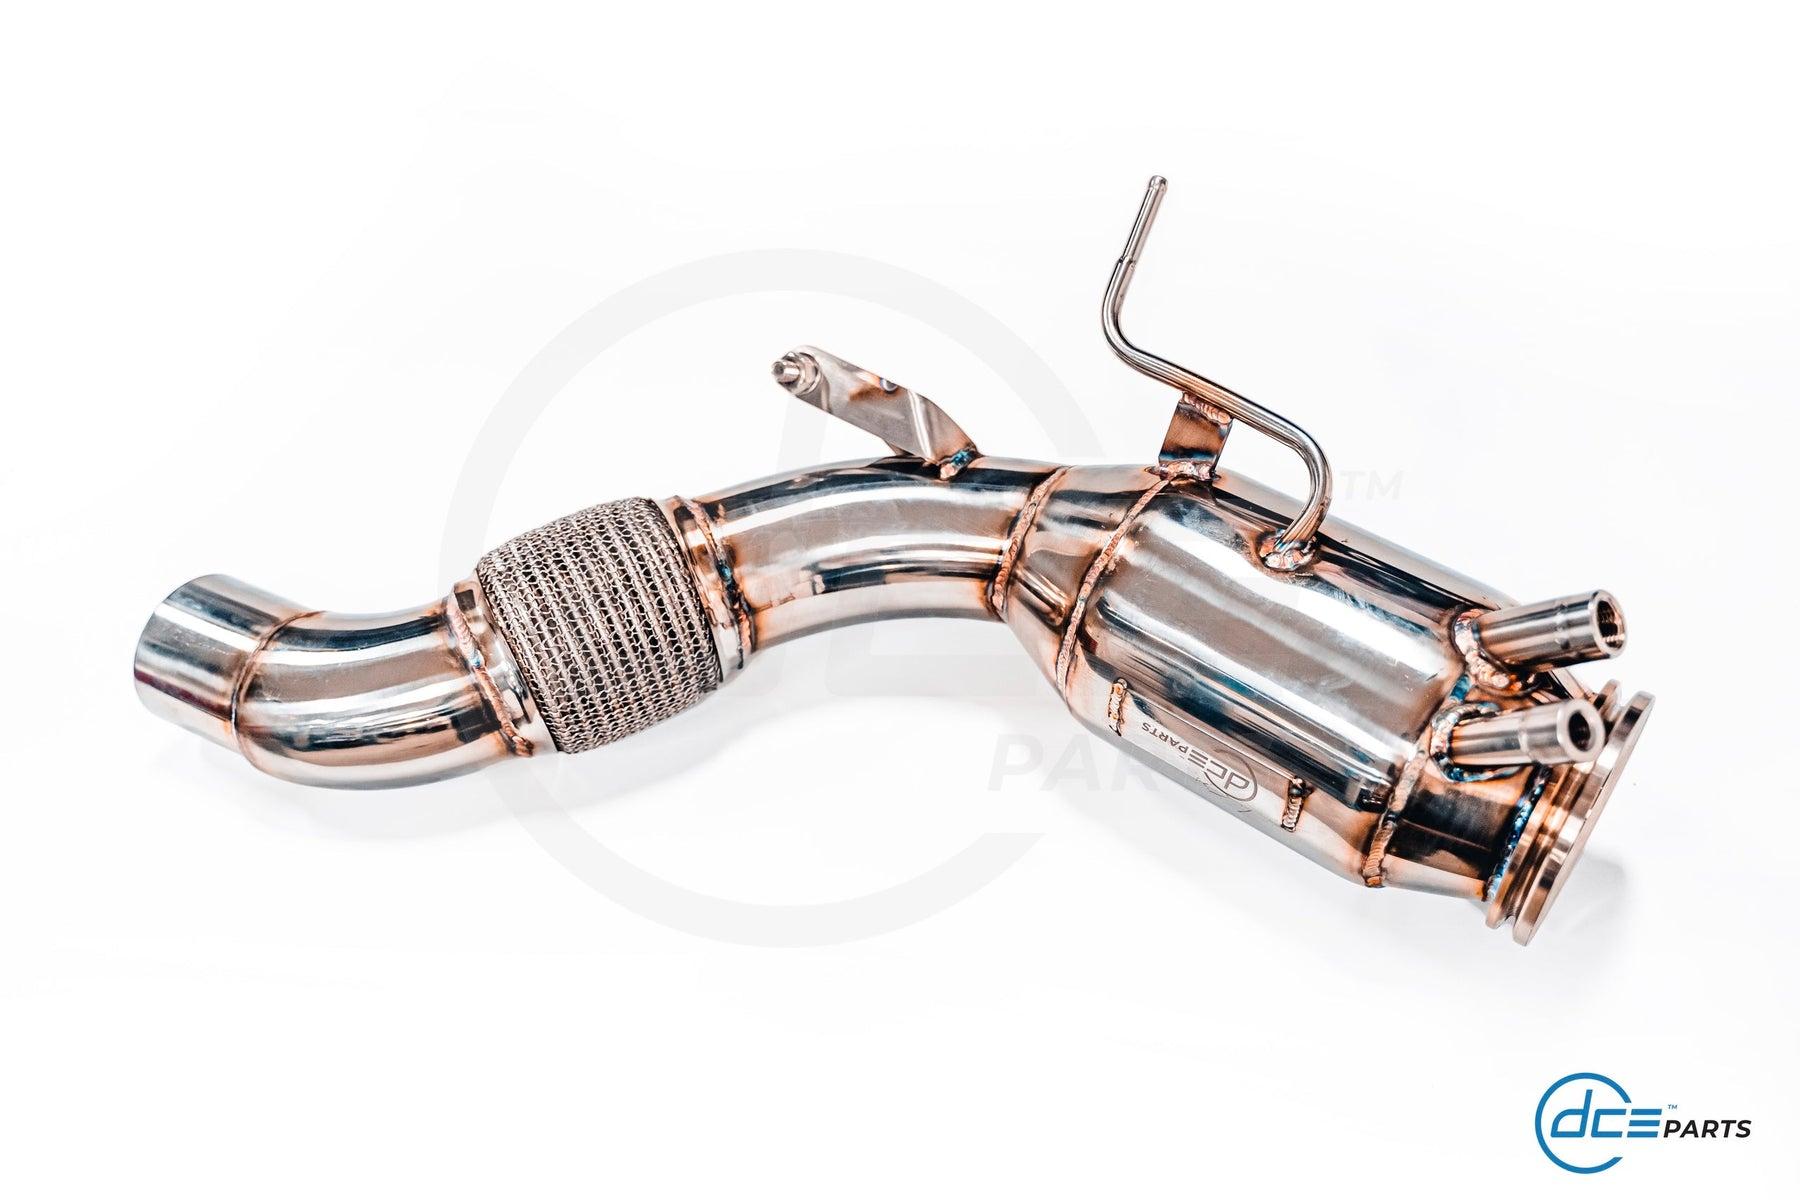 BMW Engine N57 DOWNPIPE - Serie 3 / Serie 4 / Serie 5 / Serie 6 / Serie 7 / X3 / X4 / X5 / X6 - DCE